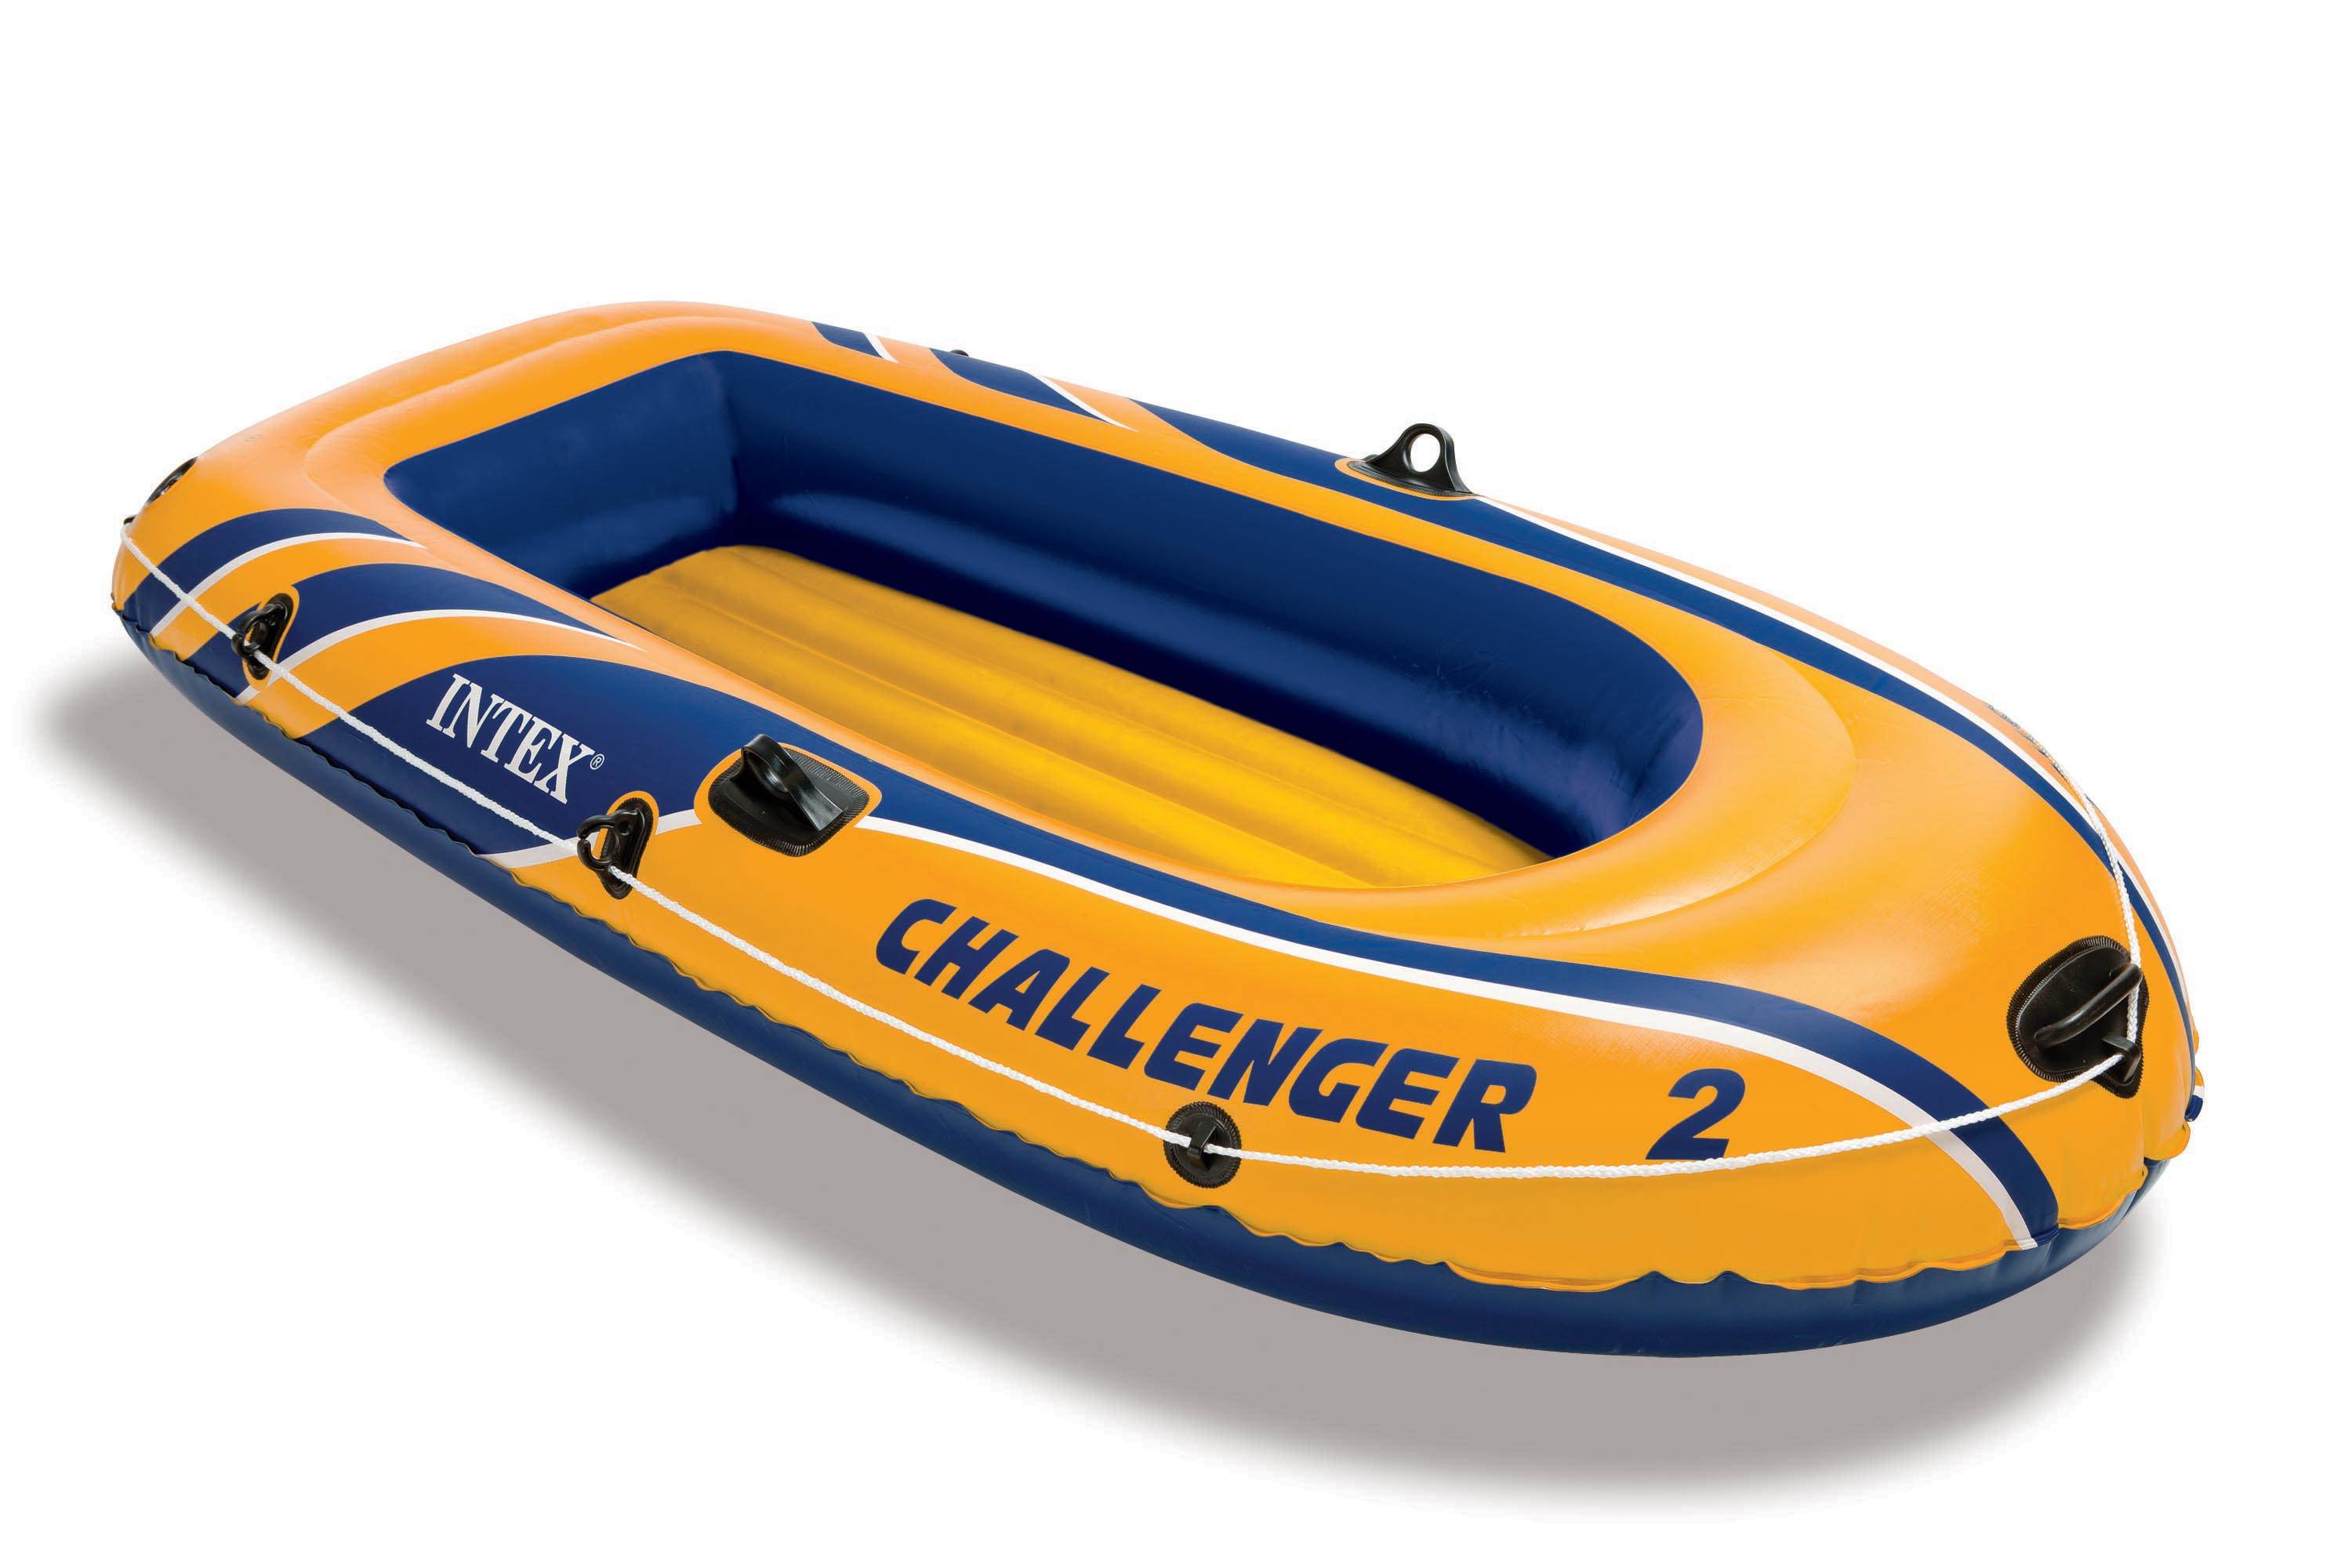 Intex Challenger 2, 2 Person Inflatable Raft with Oars & Air Pump - image 3 of 6